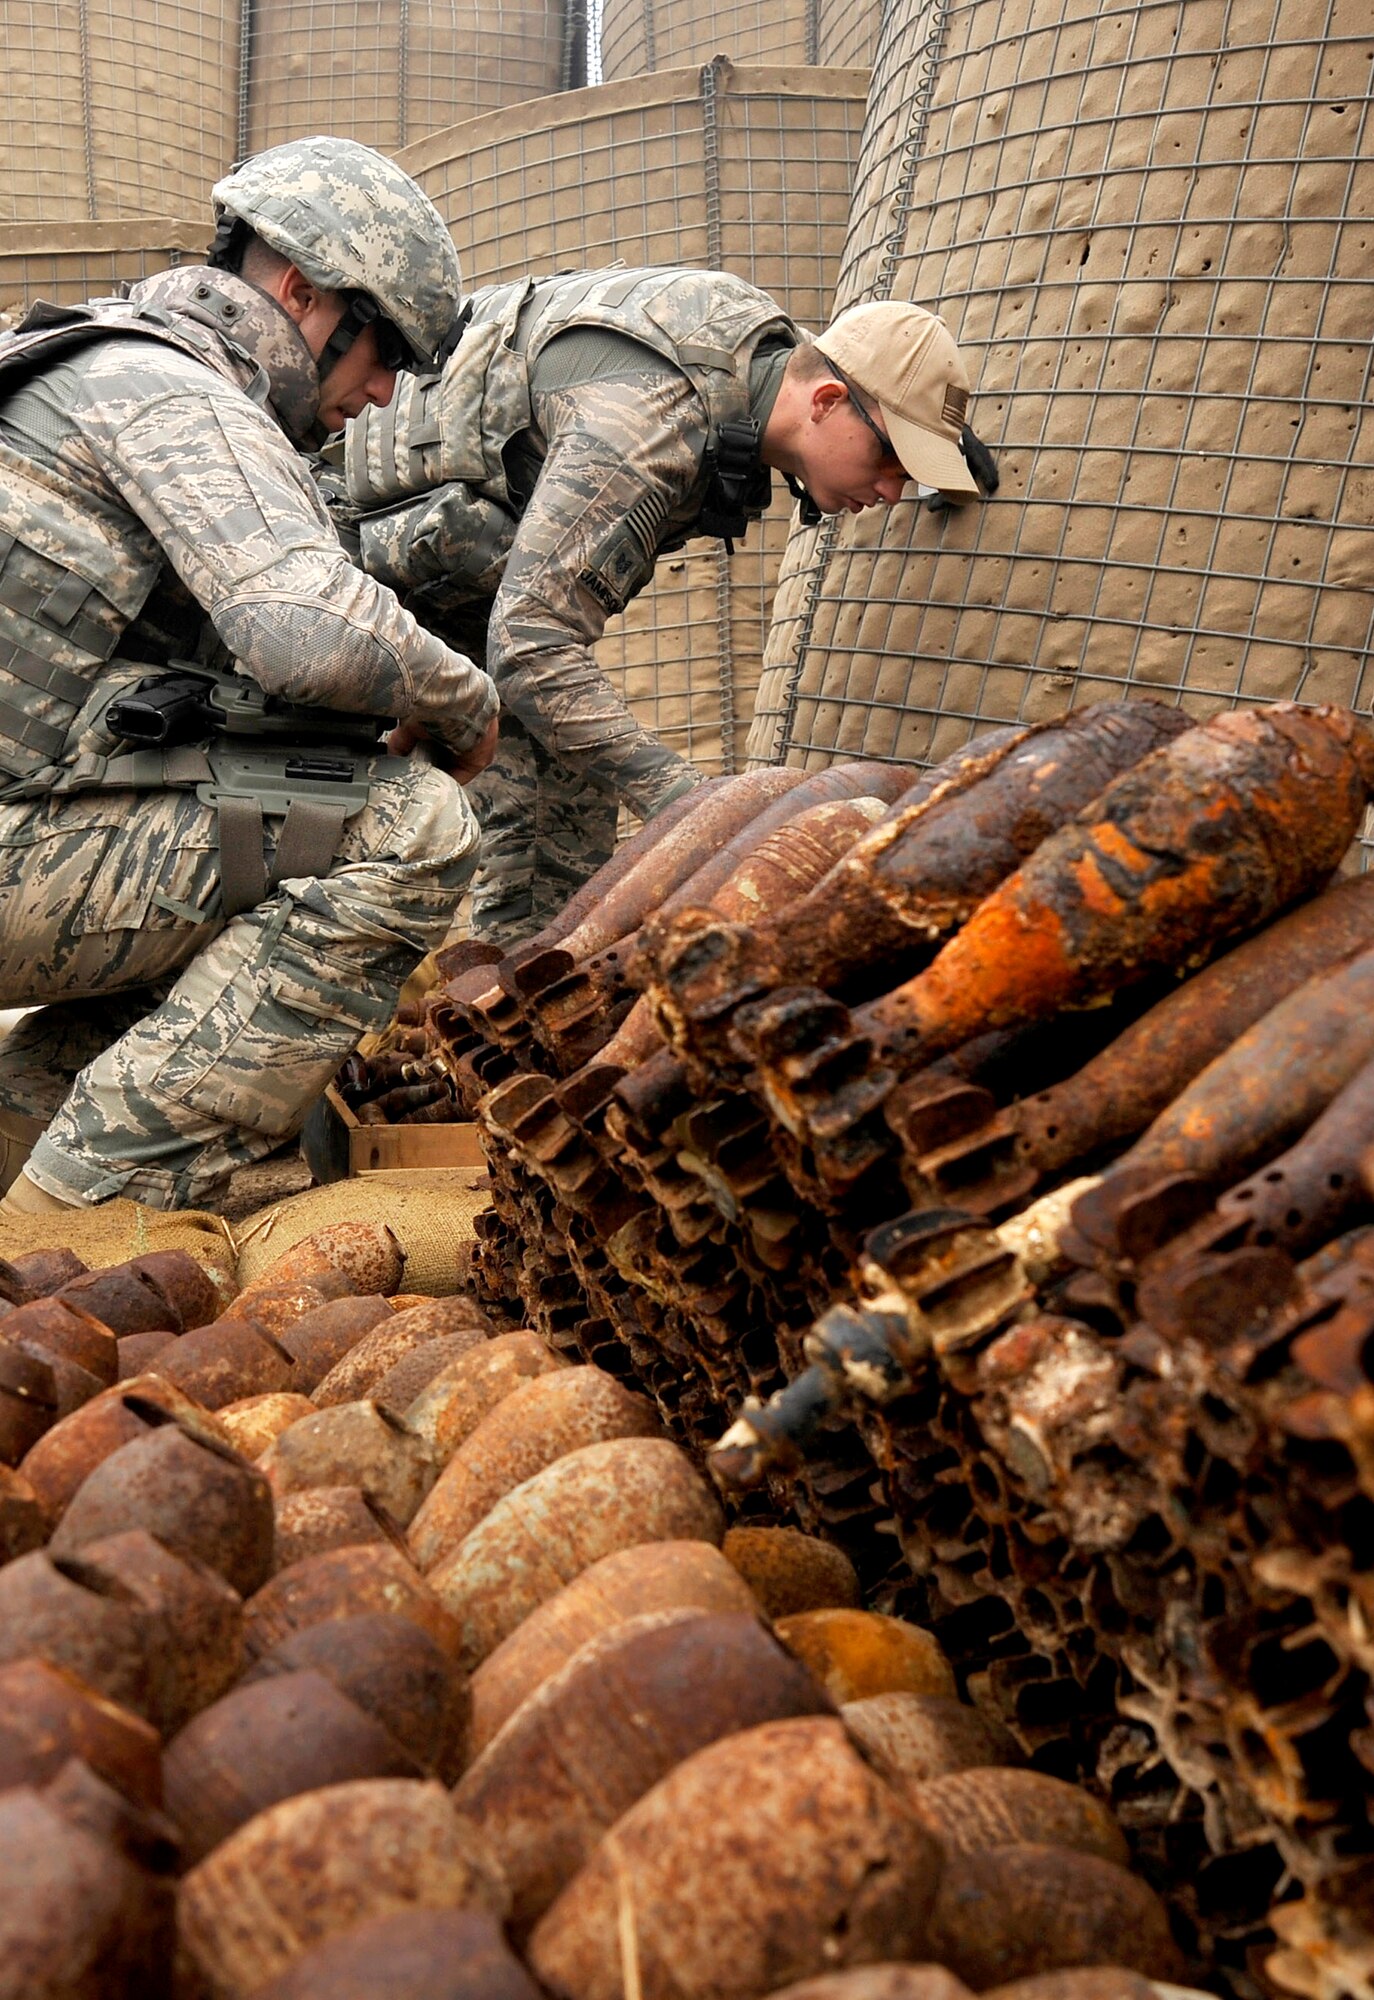 Staff Sgts. Cody Flood and Michael Jamison collect data on explosives in preparation for a controlled detonation Nov. 23, 2009, at Mahmudiyah, Iraq. Sergeants Flood and Jamison are 447th Expeditionary Civil Engineer Squadron explosive ordnance disposal technicians. (U.S. Air Force photo/Staff Sgt. Angelita Lawrence) 